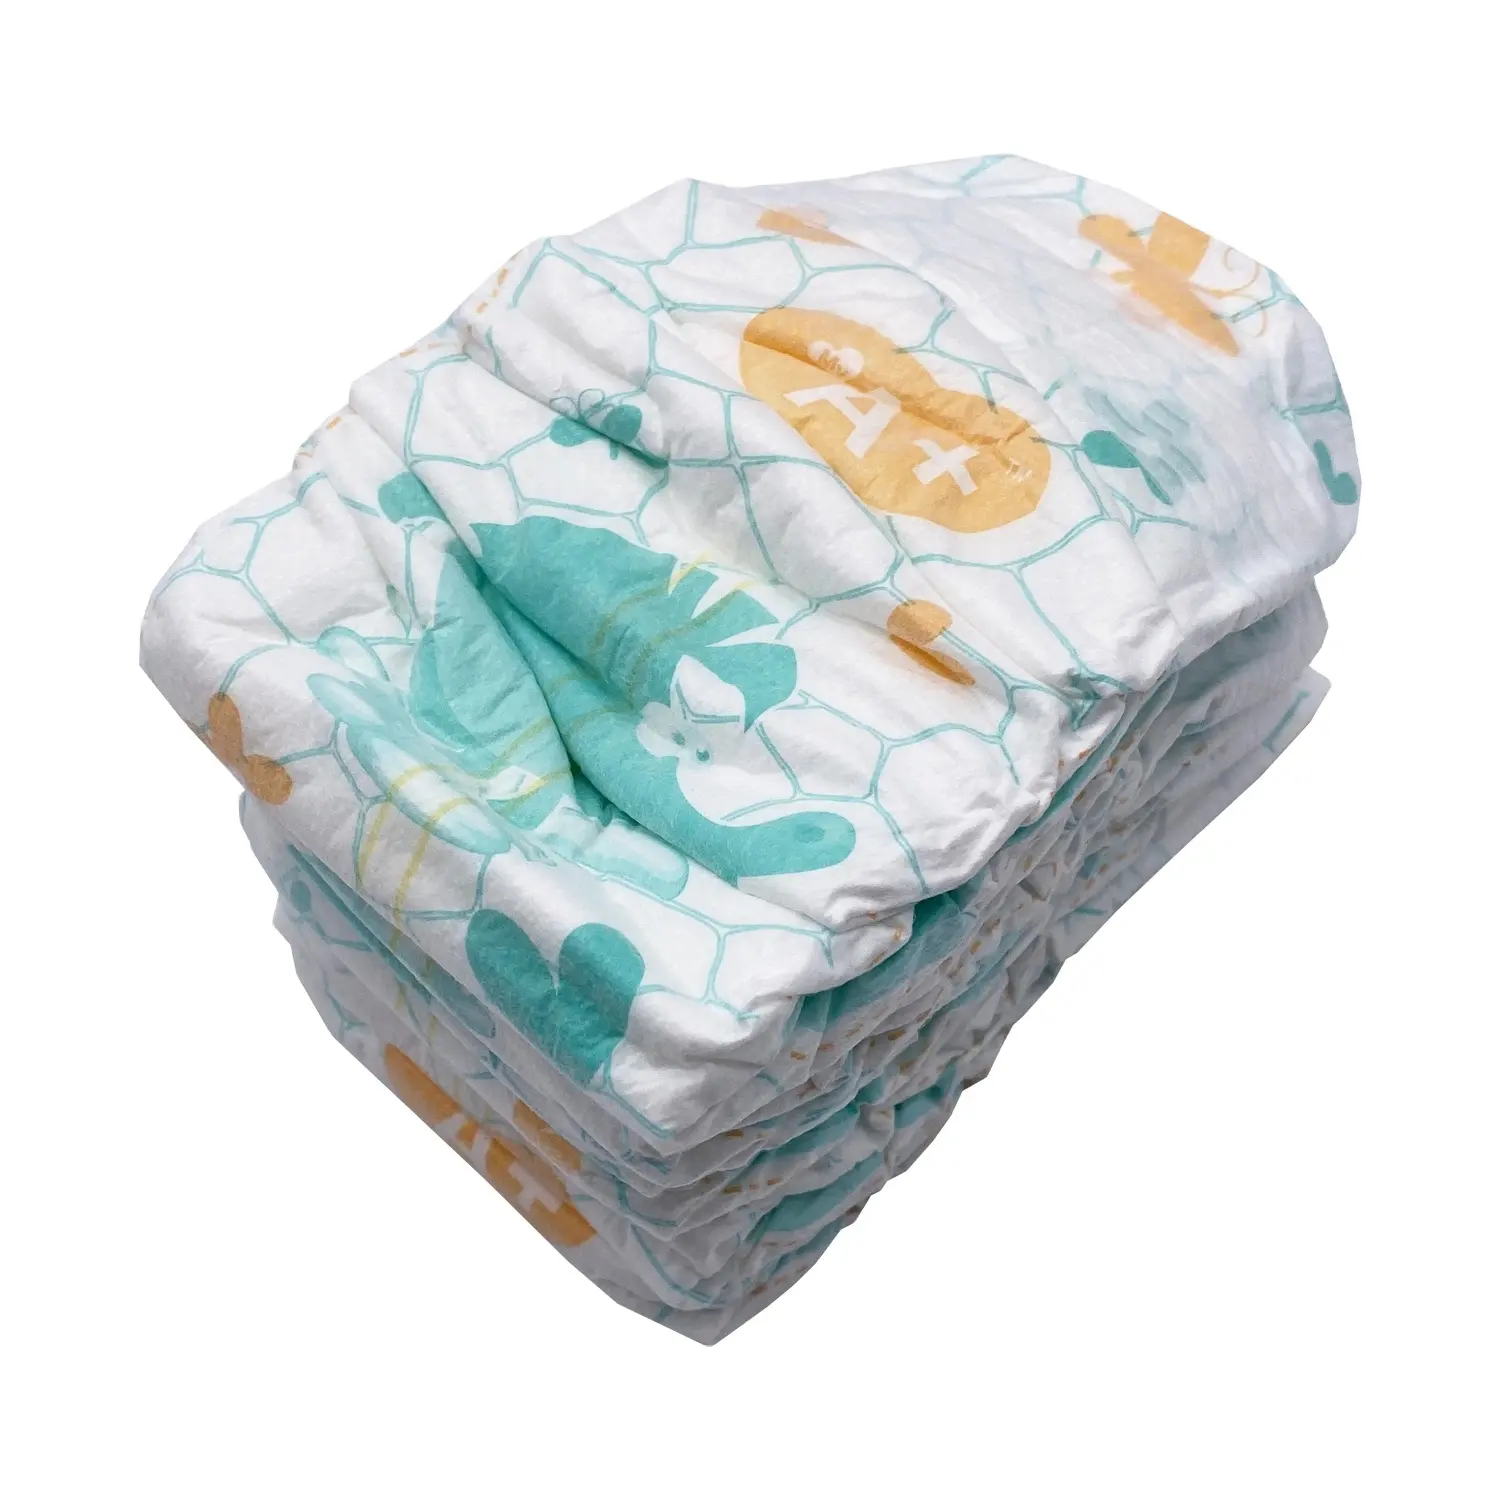 Pampers Baby Diapers in All Sizes - Bulk Discounts and Free Shipping